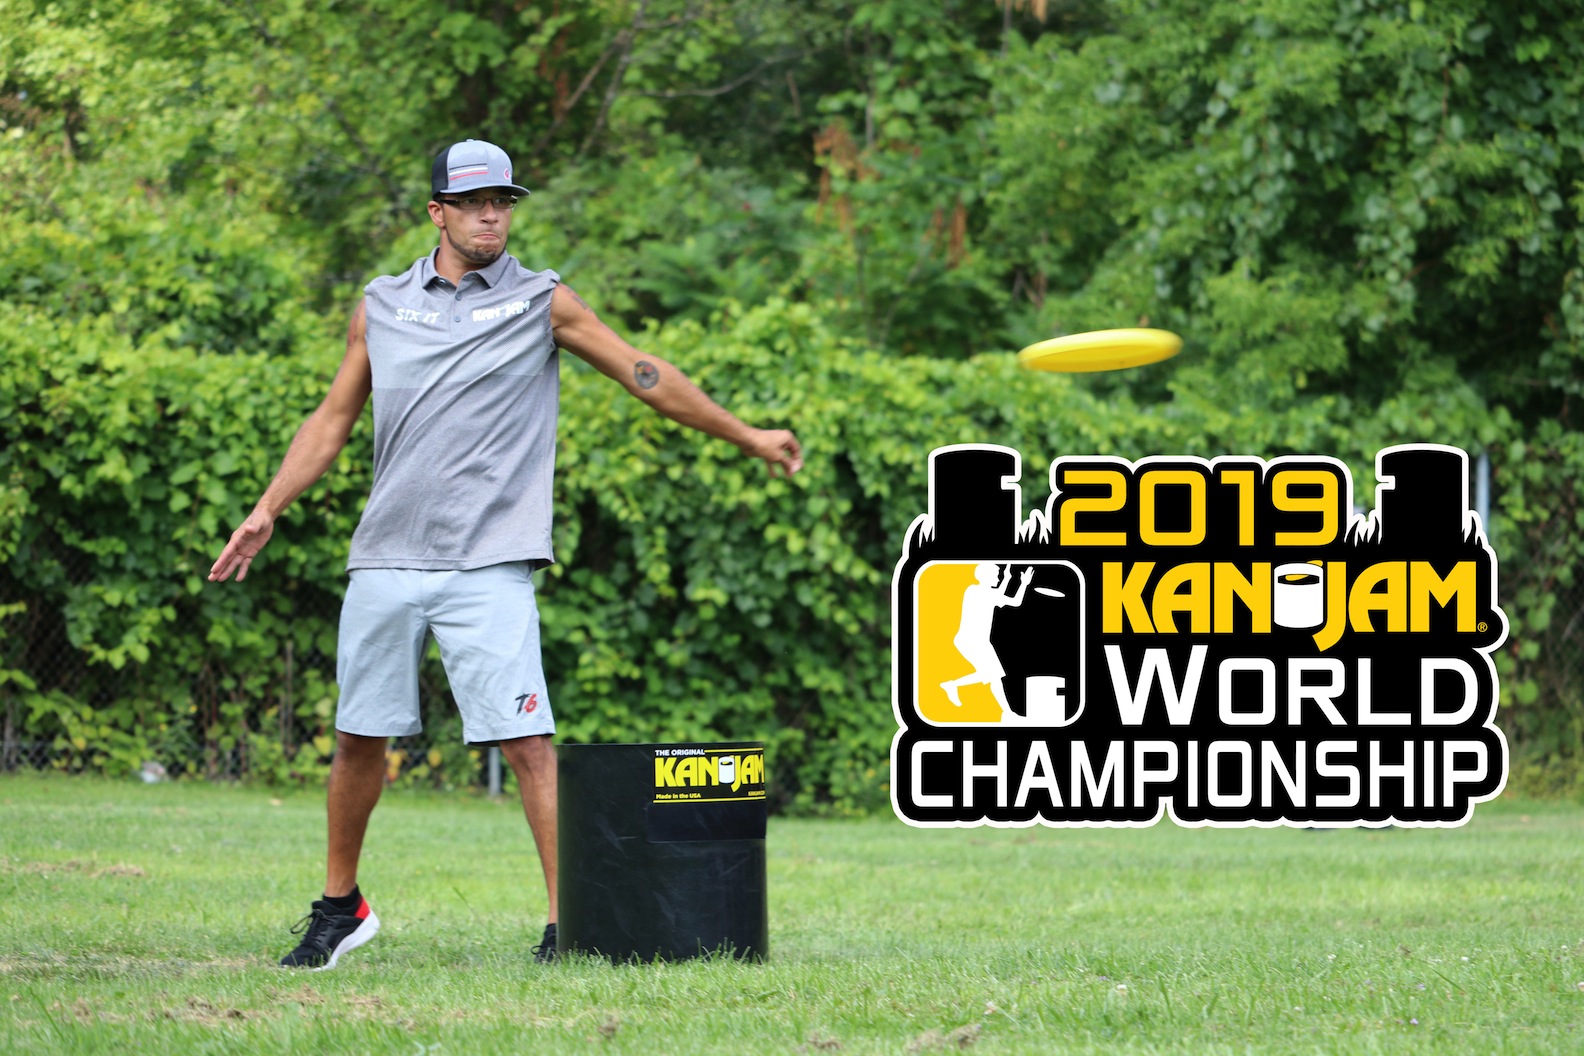 Rochester KanJam player Sam Caquias. Here, Caquias throws the disc in a playoff game for `Team 6 it` at last year's KanJam World Championship.